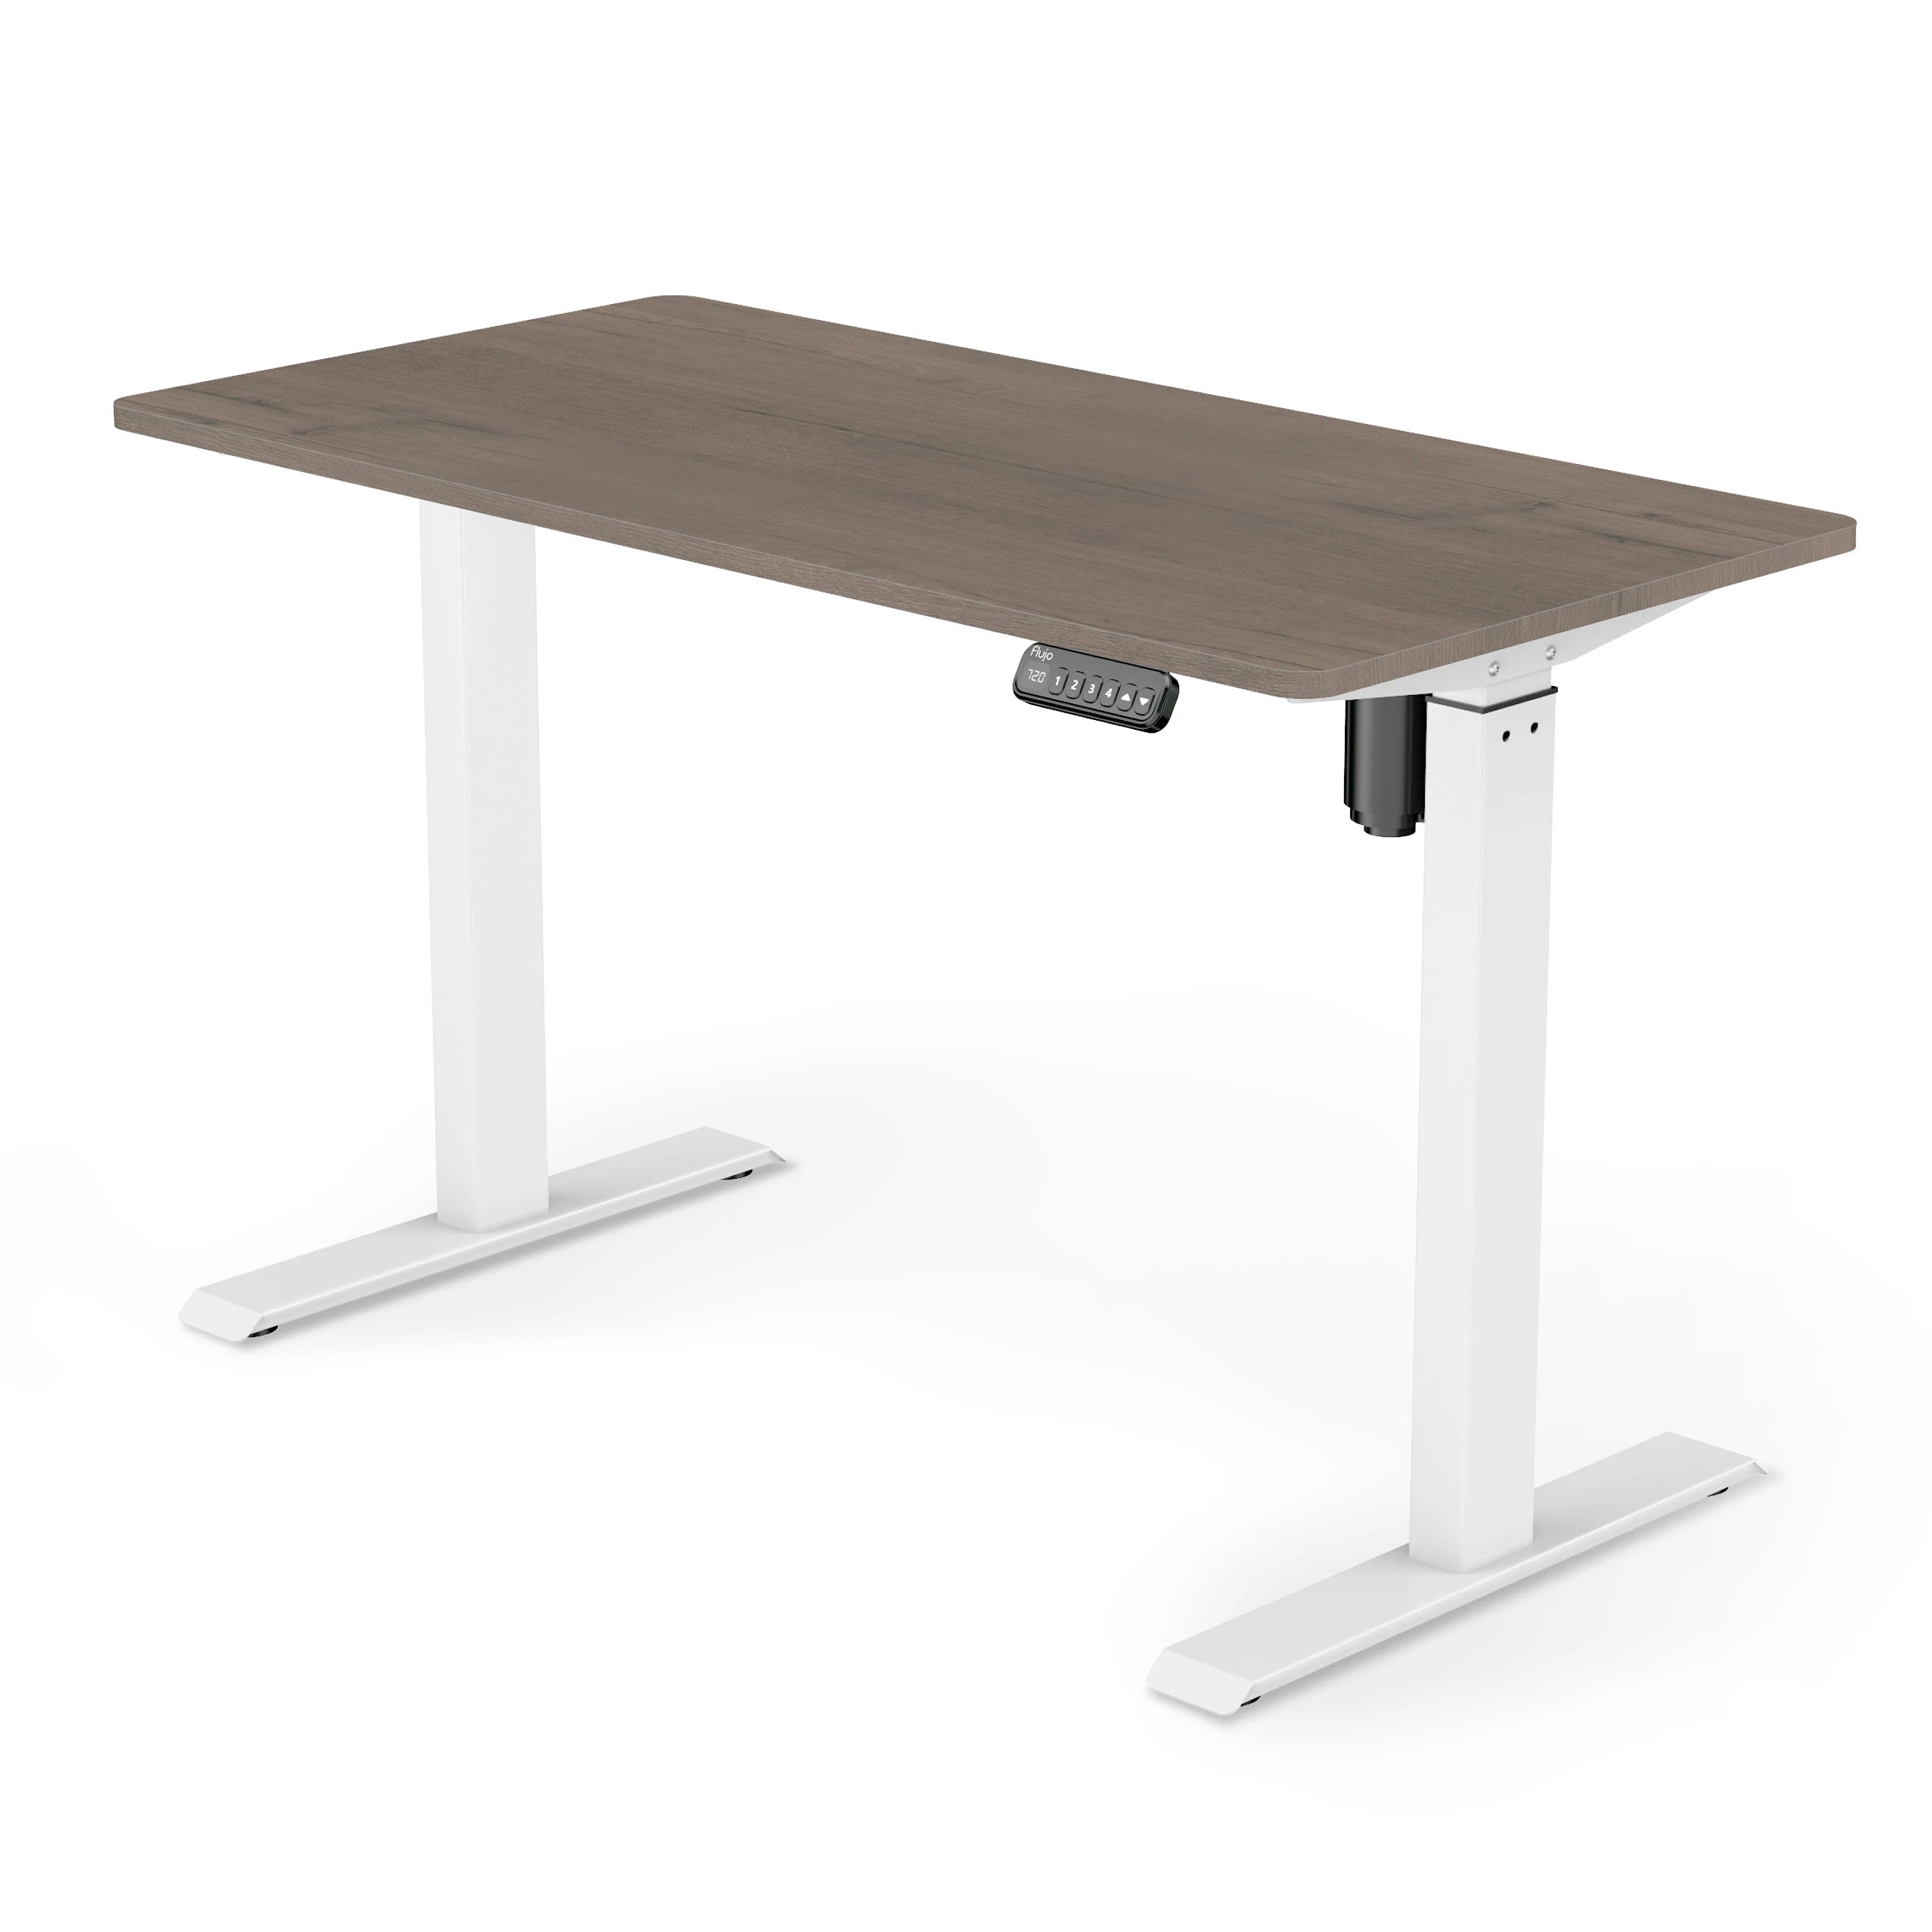 SmarTrax Ergonomic Standing Desk featuring a arizona wood finish and white frame, complete with programmable height settings for a comfortable standing work experience.